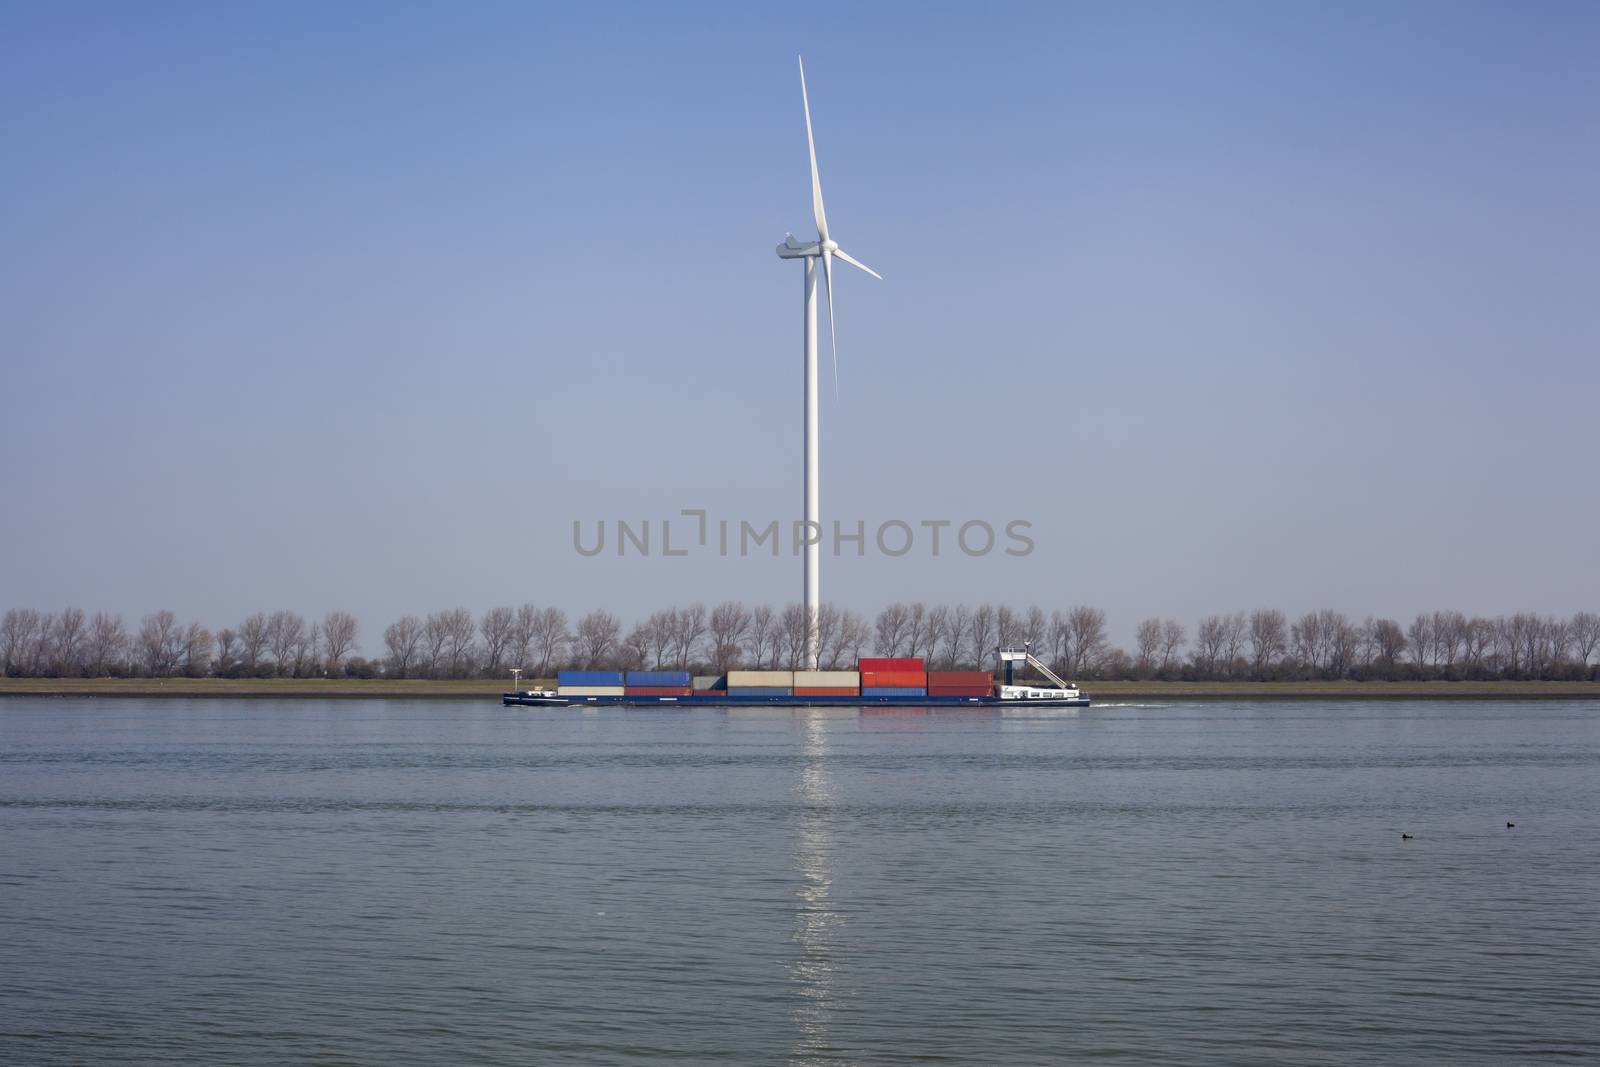 Netherlands, New Waterway. Container ship in front of modern windmill shipping, transport and heavy industry nera Maasvlakte 2.